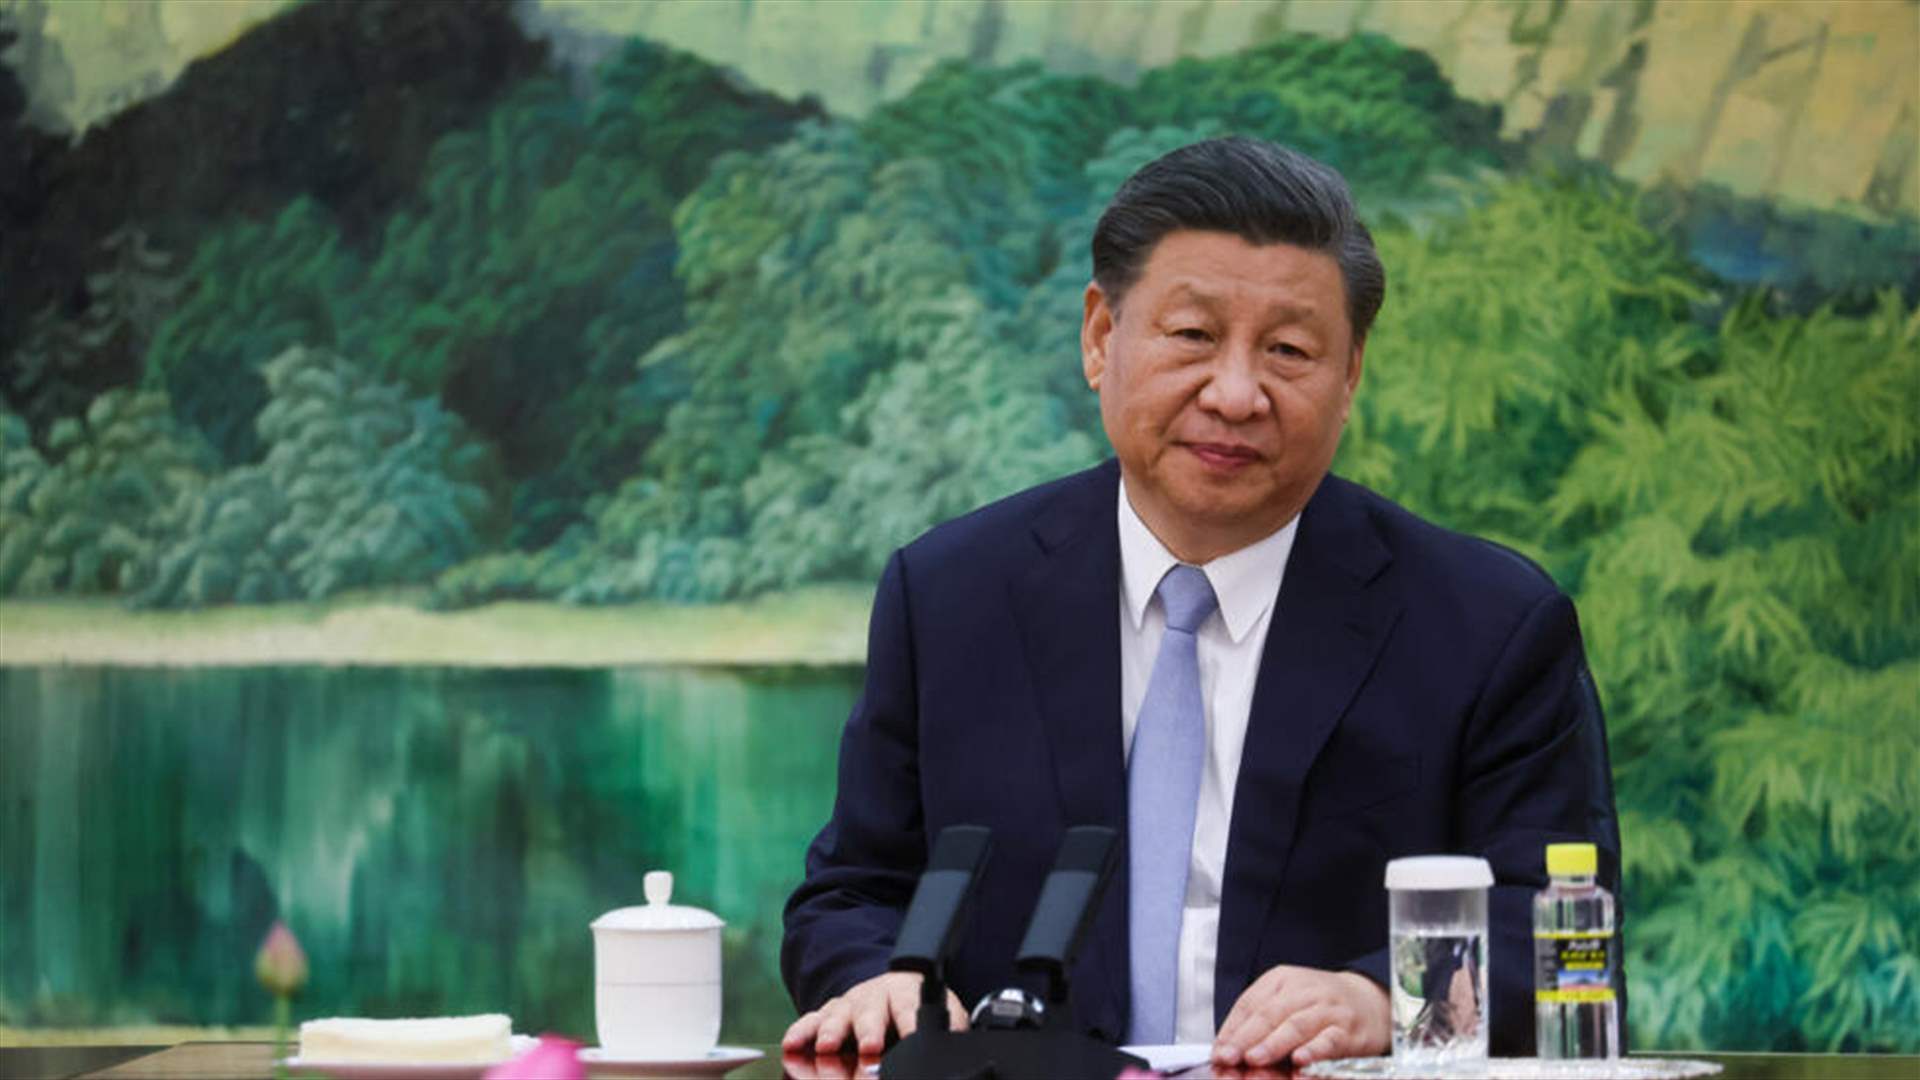 Chinese President Xi Jinping to Visit South Africa, Attend BRICS Summit